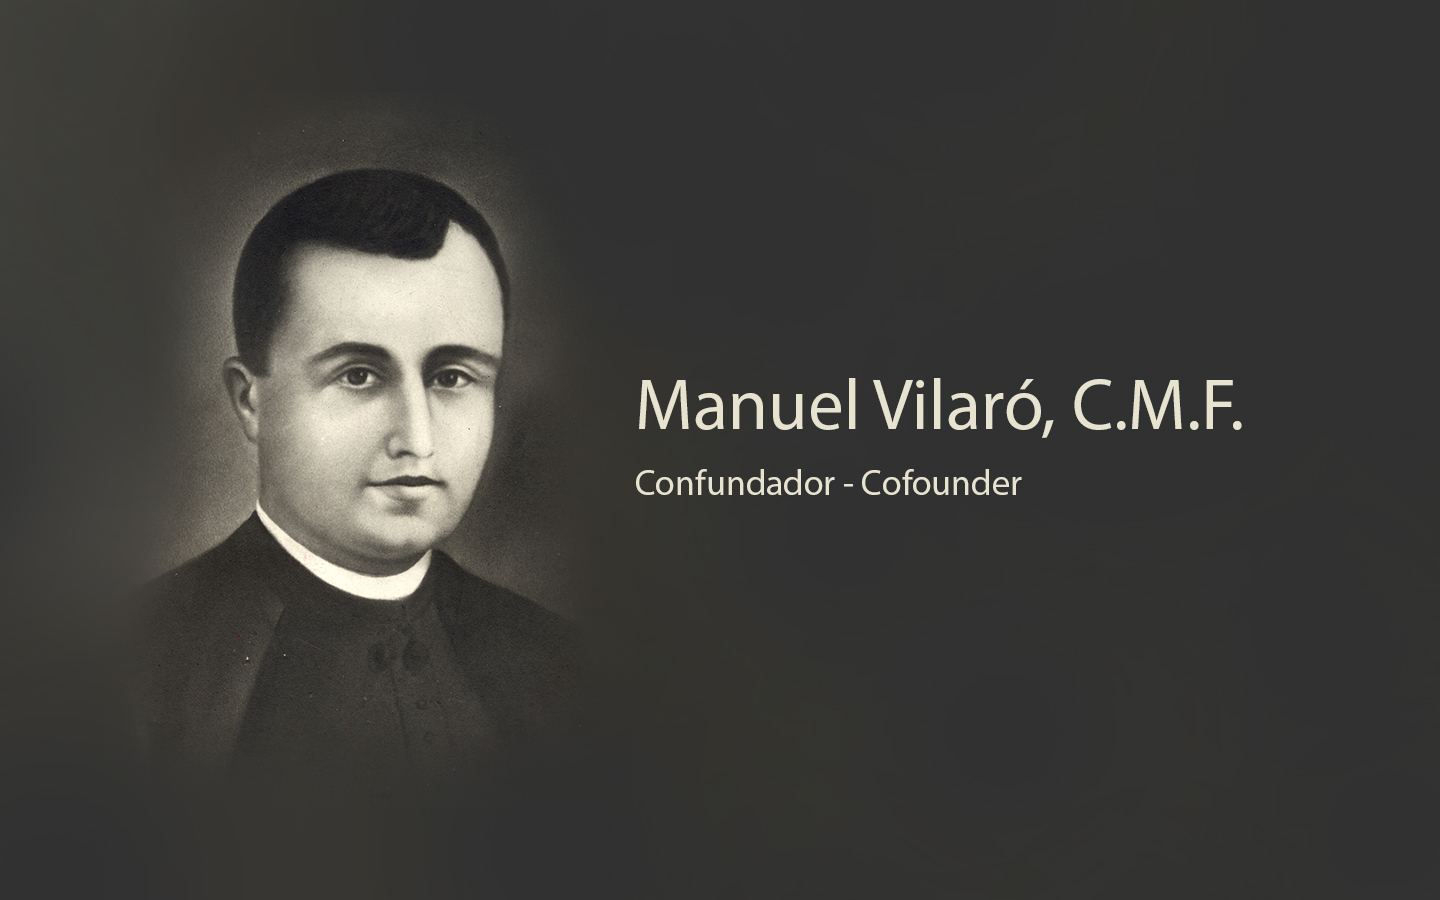 In memory of Fr. Manuel Vilaró, Co-founder, on the centenary of his reinstatement (1922)